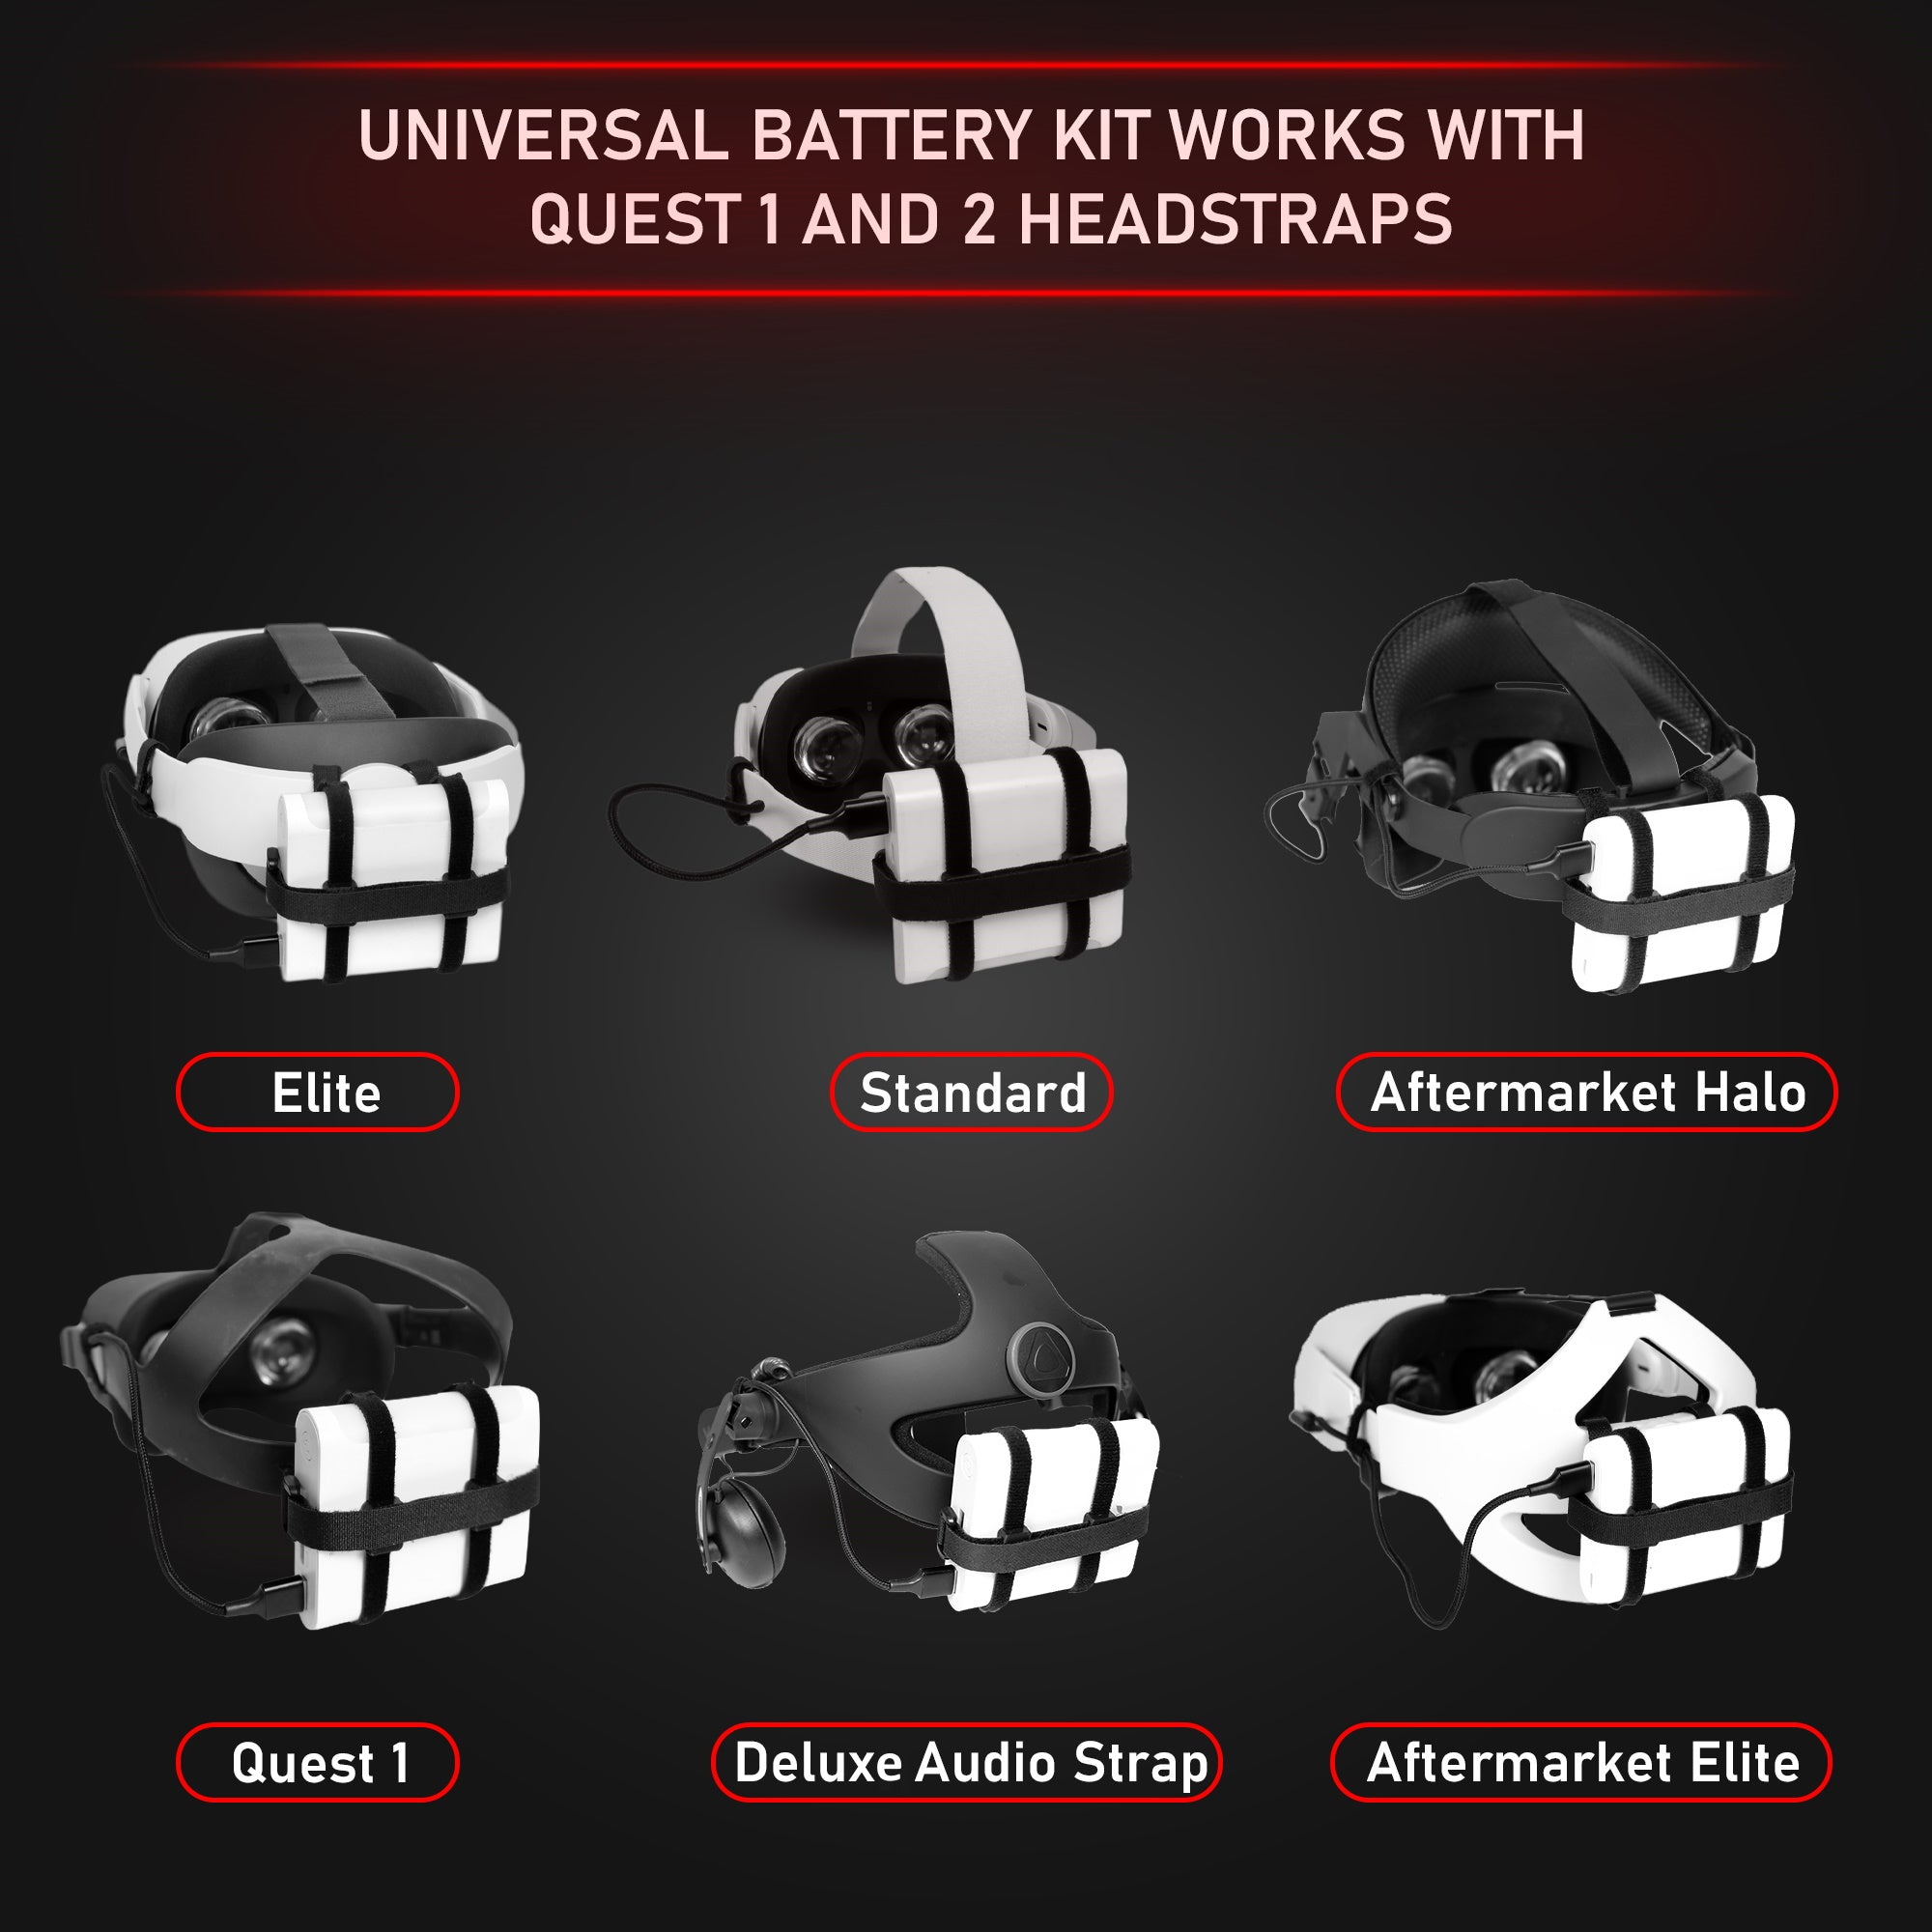 Universal Battery Kit works with Quest 1 and 2 Headstraps. Elite. Standard. Aftermarket Halo. Quest 1. Deluxe audio strap. Aftermarket Elite